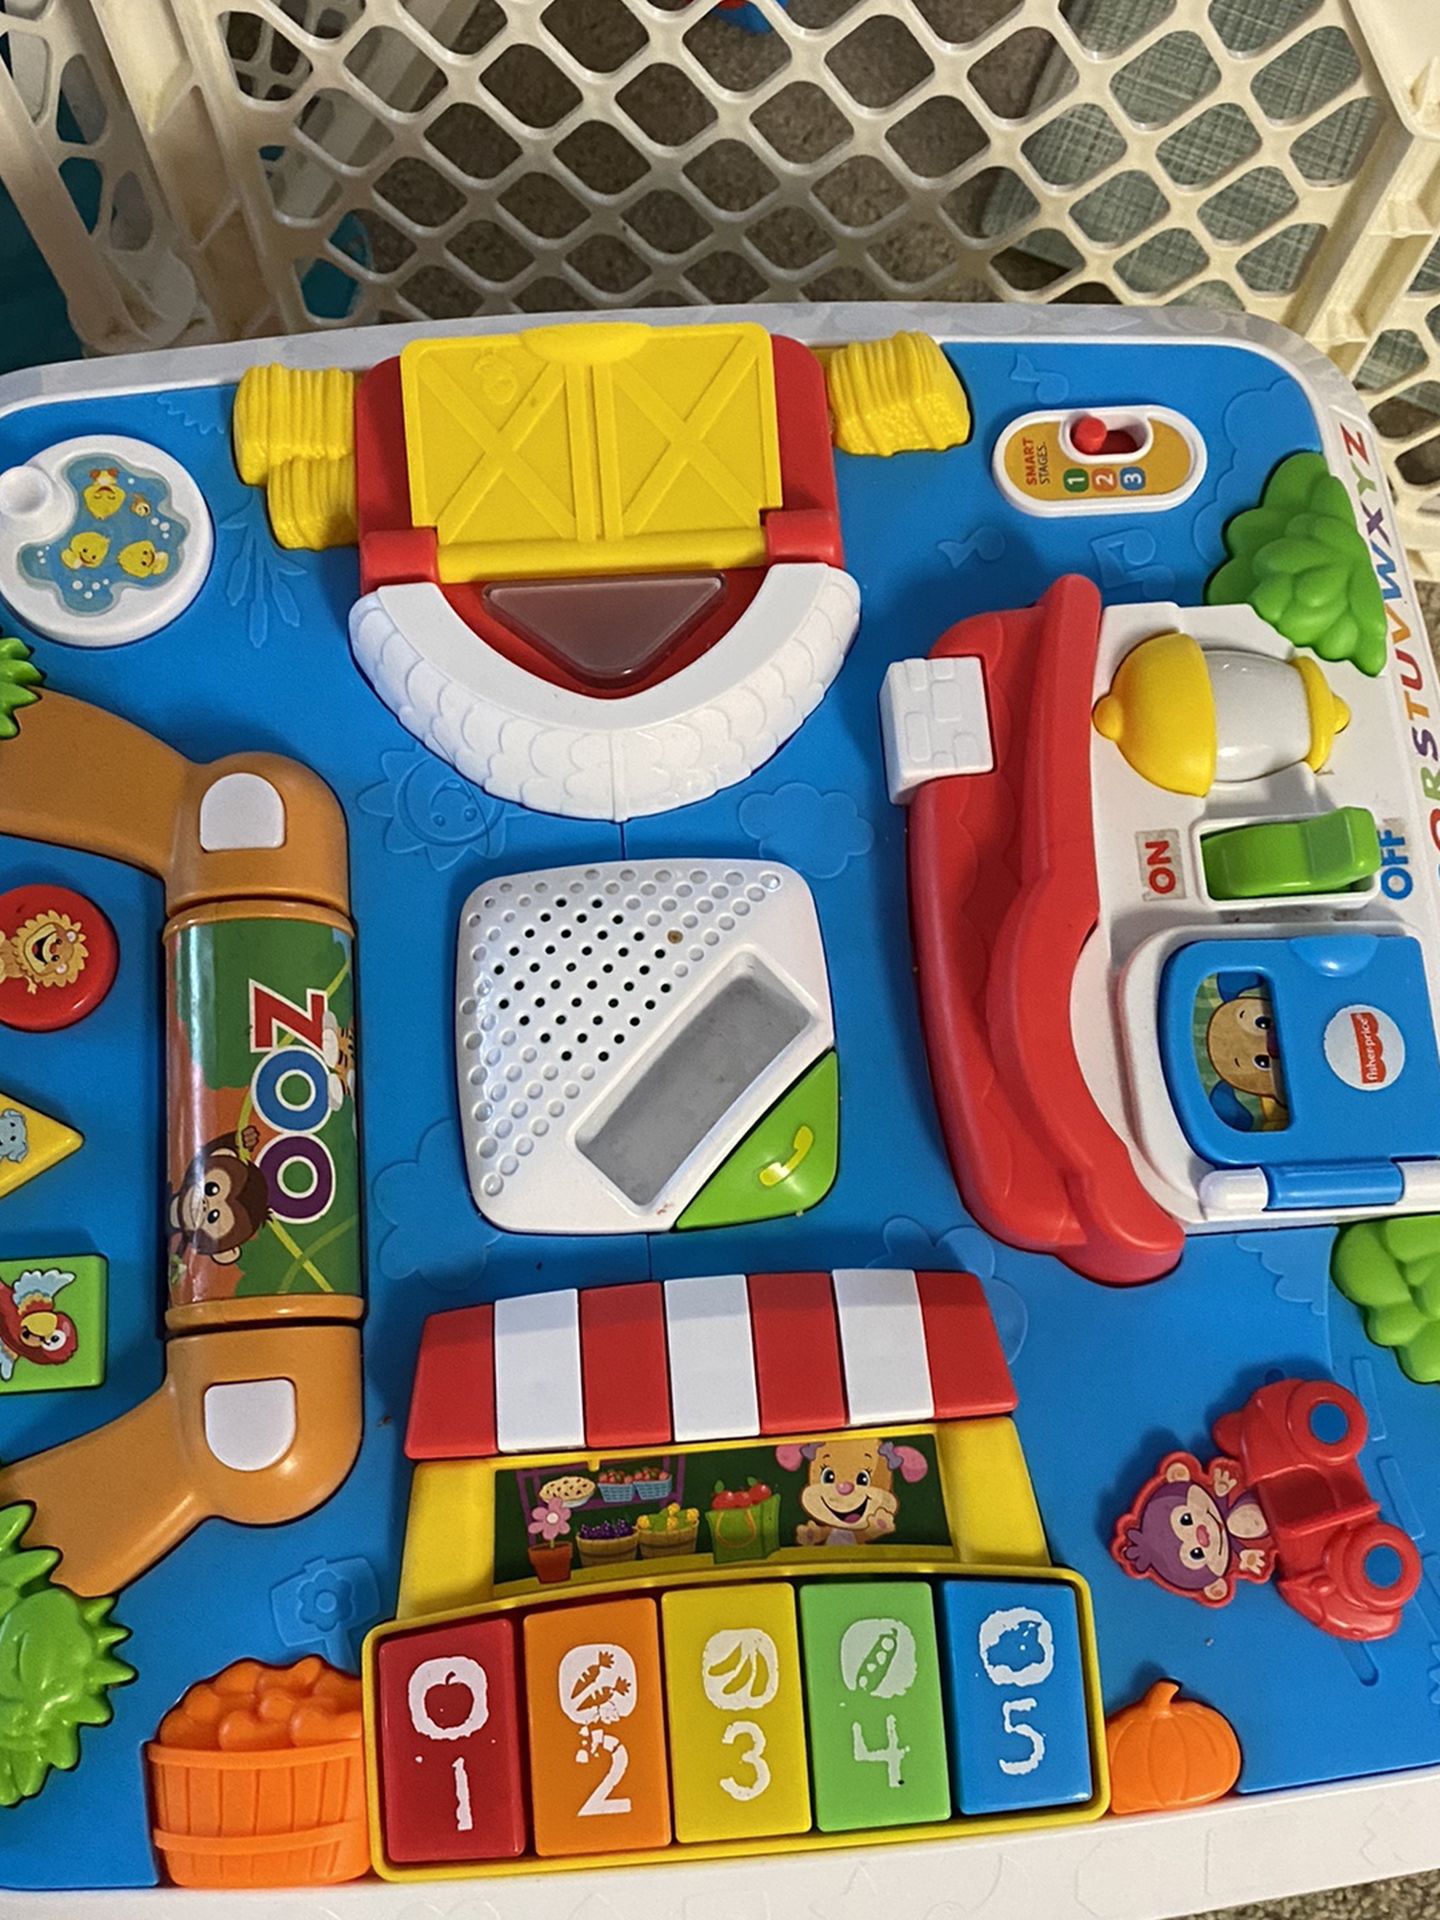 Fisher Price Laugh And Learn Around The Town Brand New Table Only 10$!!! Pickup In Irving